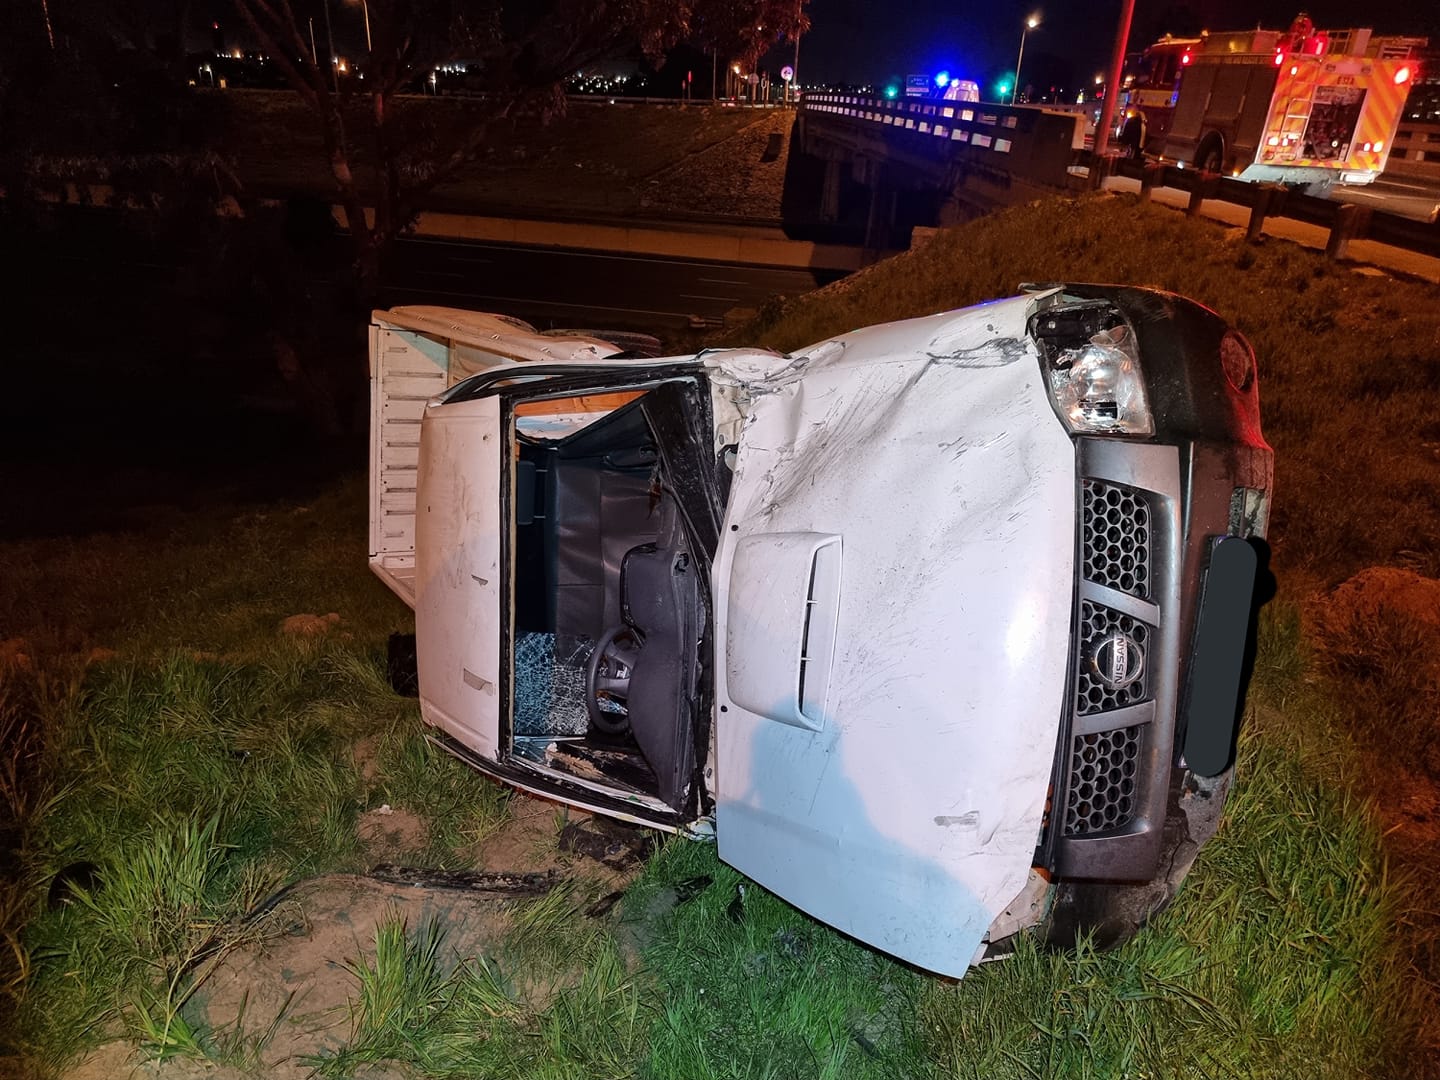 Three injured in a collision at Jakes Gerwel, Cape Town